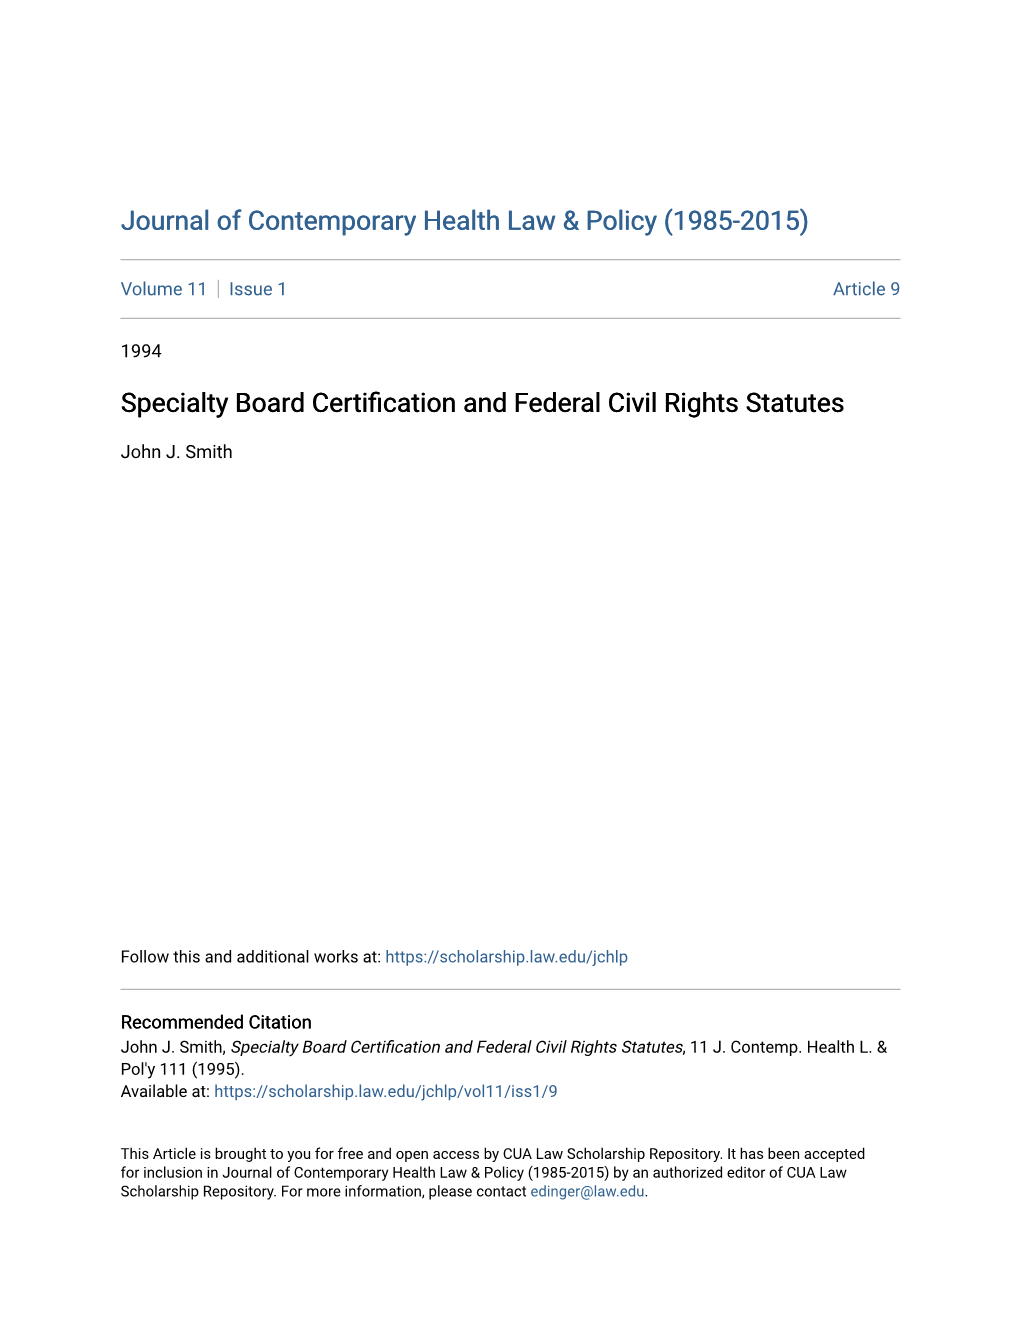 Specialty Board Certification and Federal Civil Rights Statutes, 11 J